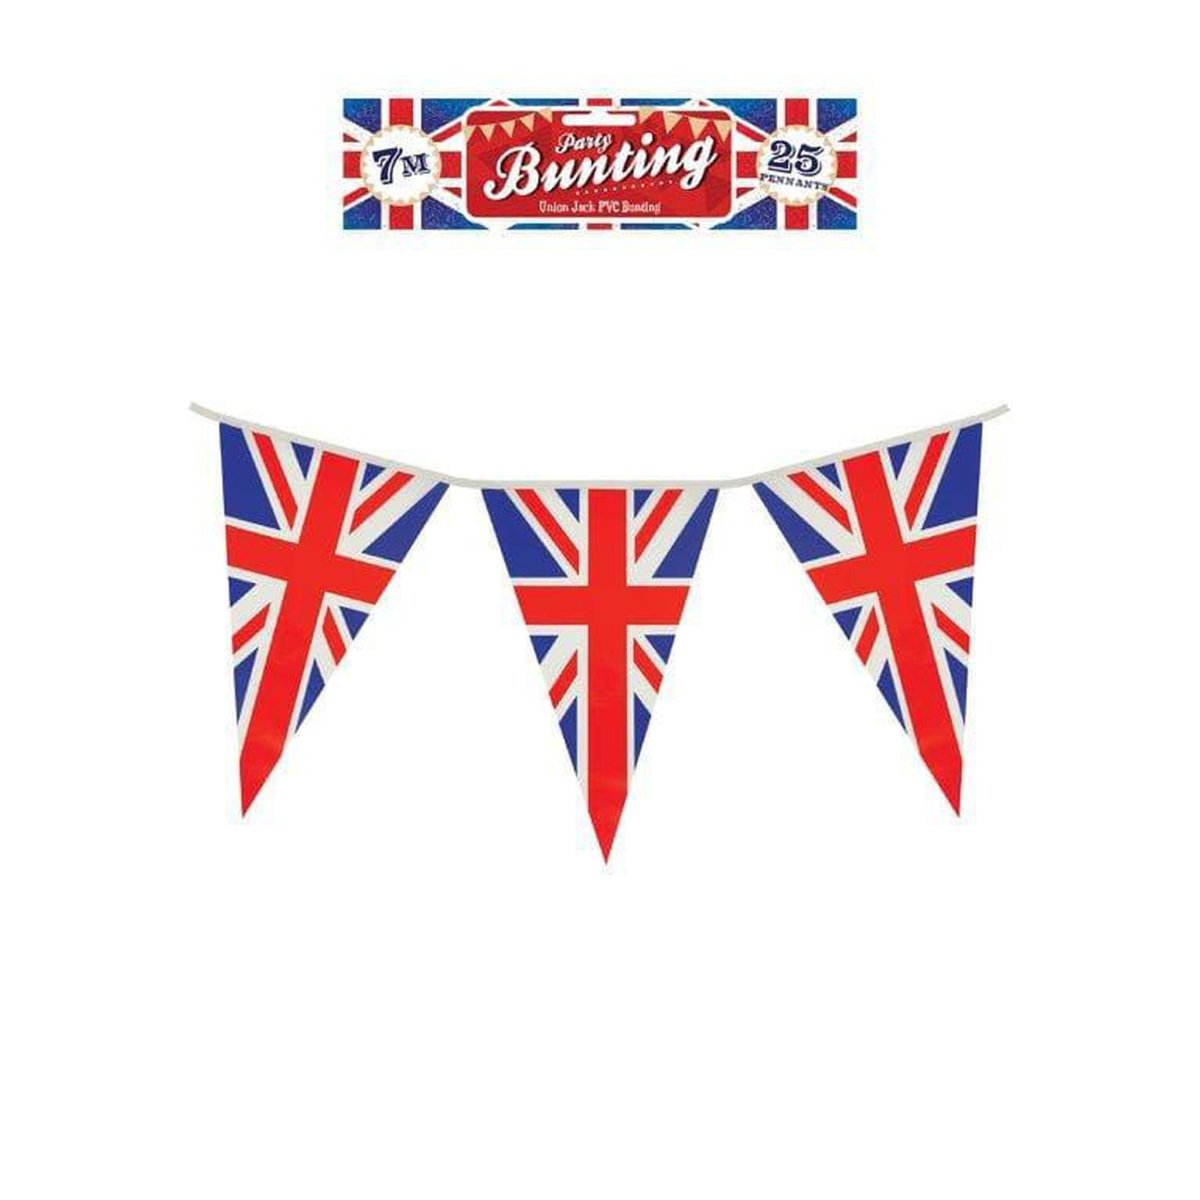 Union Jack Bunting 7m (25 Pennants) - Kids Party Craft